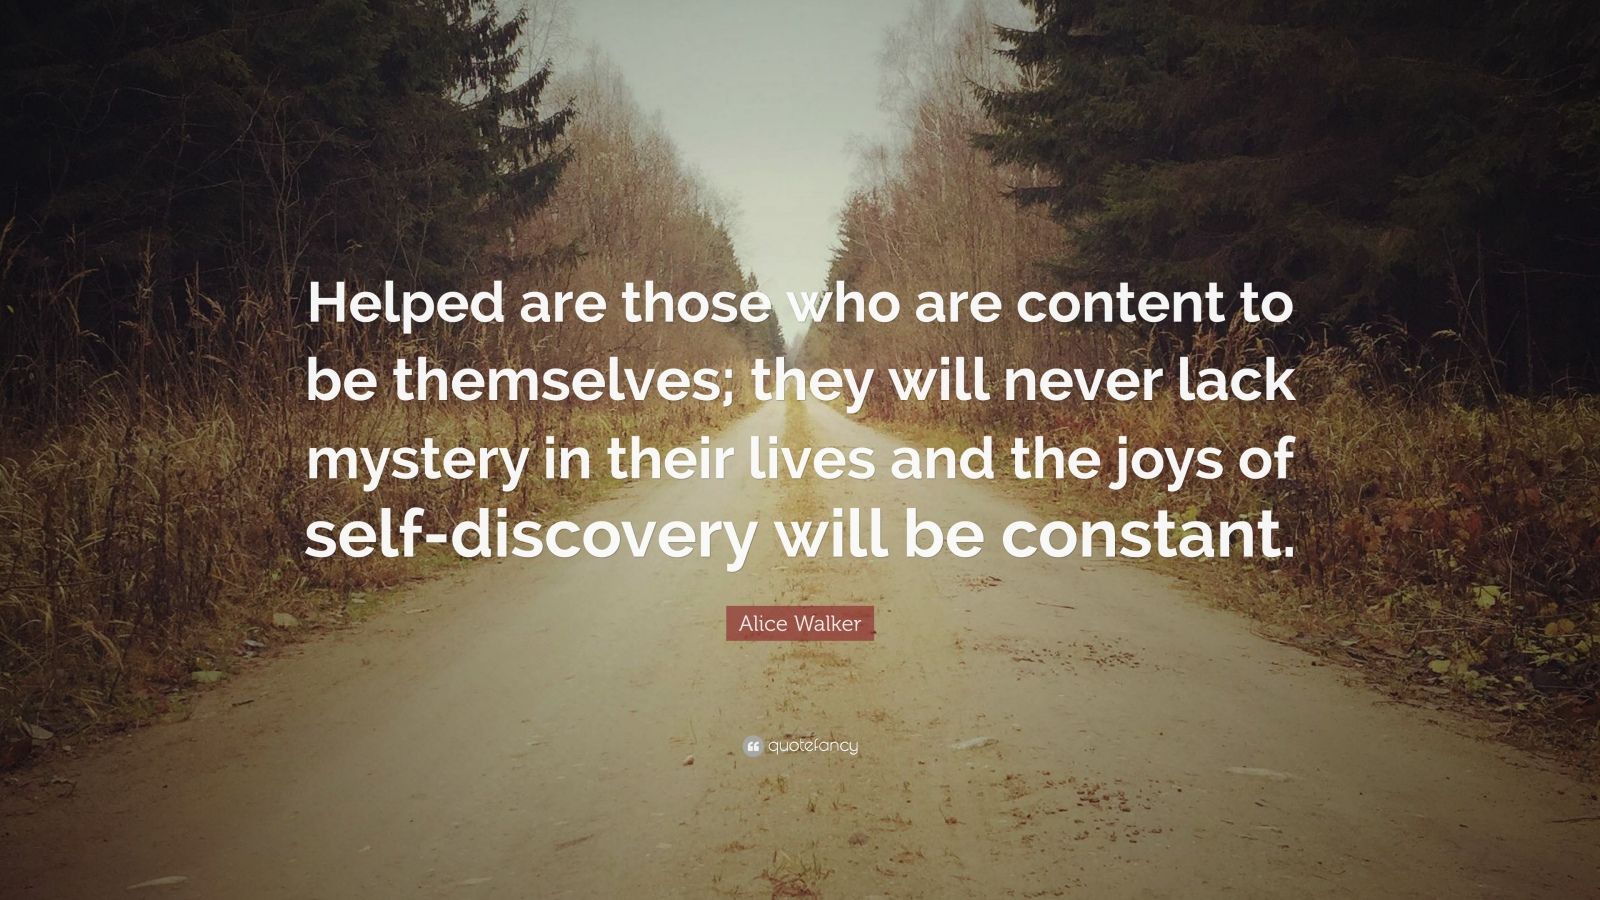 Alice Walker Quote “Helped are those who are content to